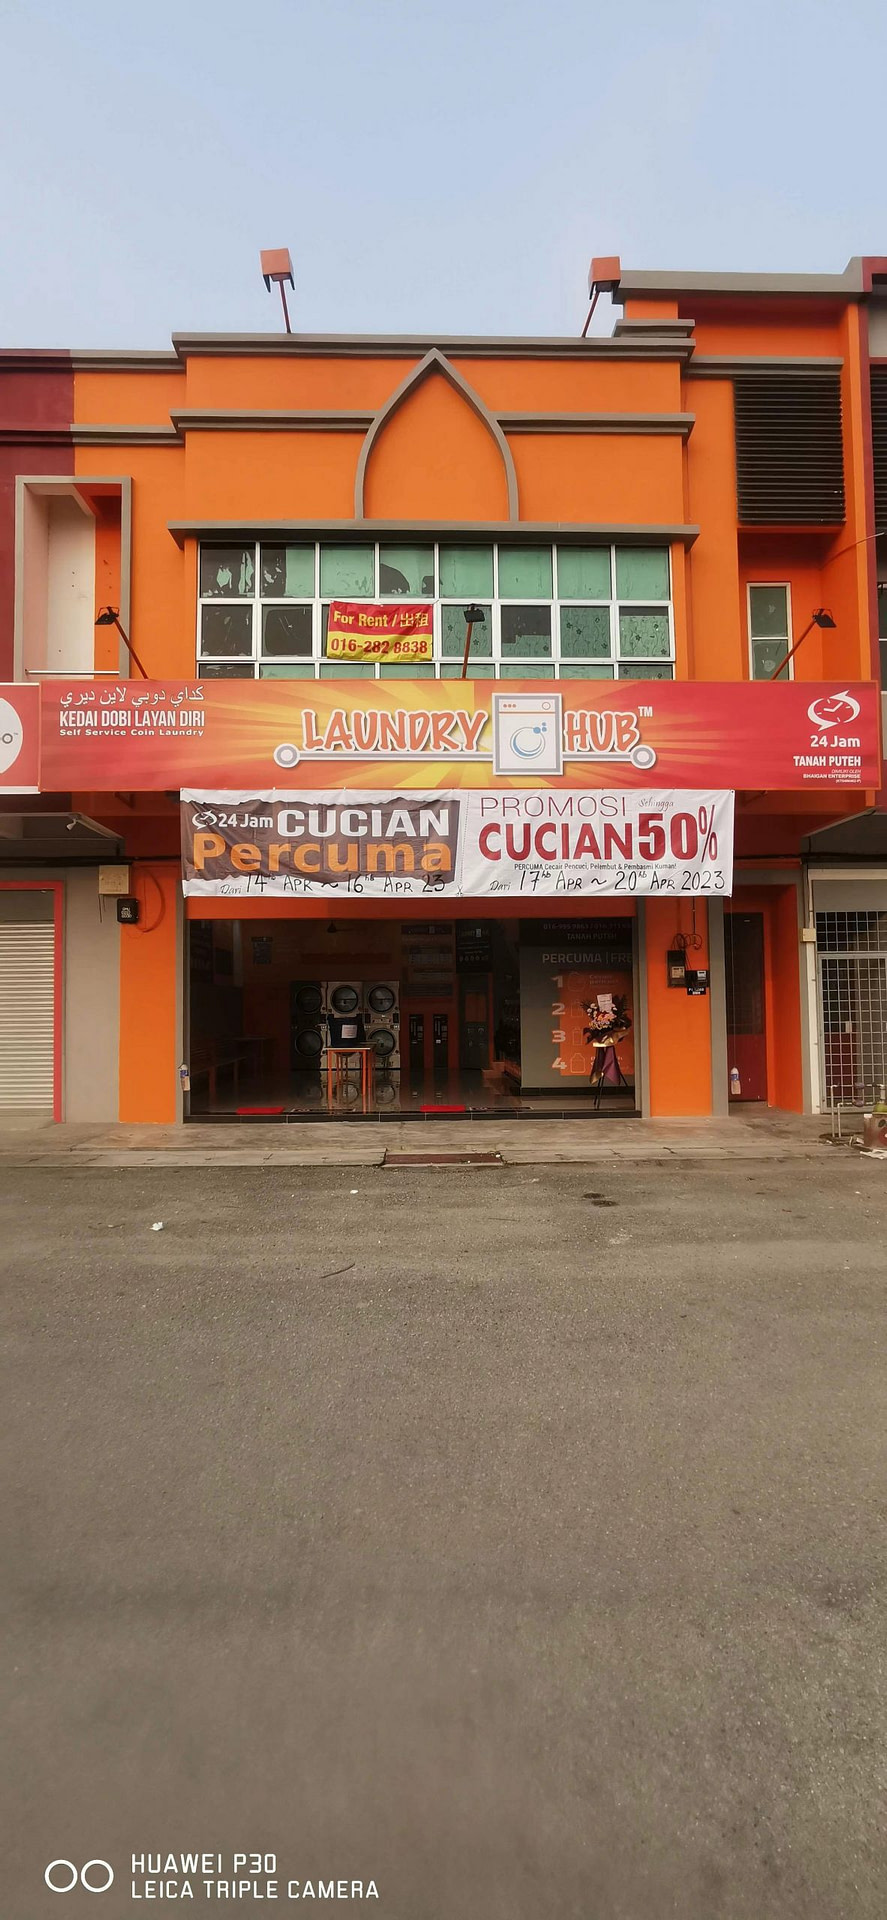 New LaundryHub outlet in Tanah Puteh, Gua Musang